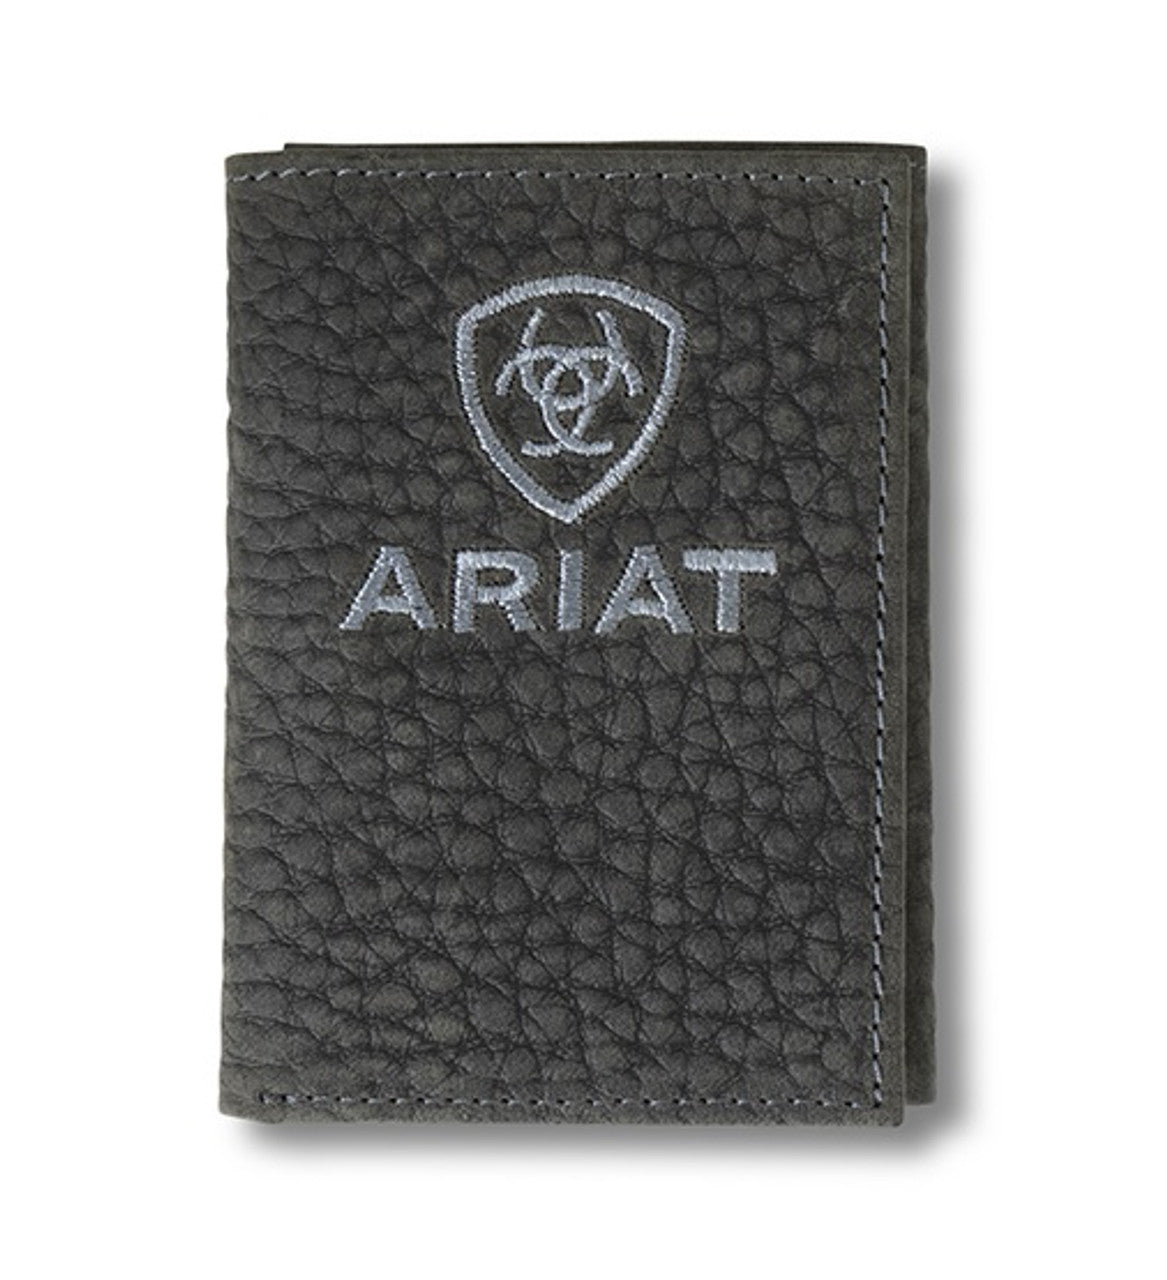 Ariat Trifold Bull Hide Embroidered Wallet